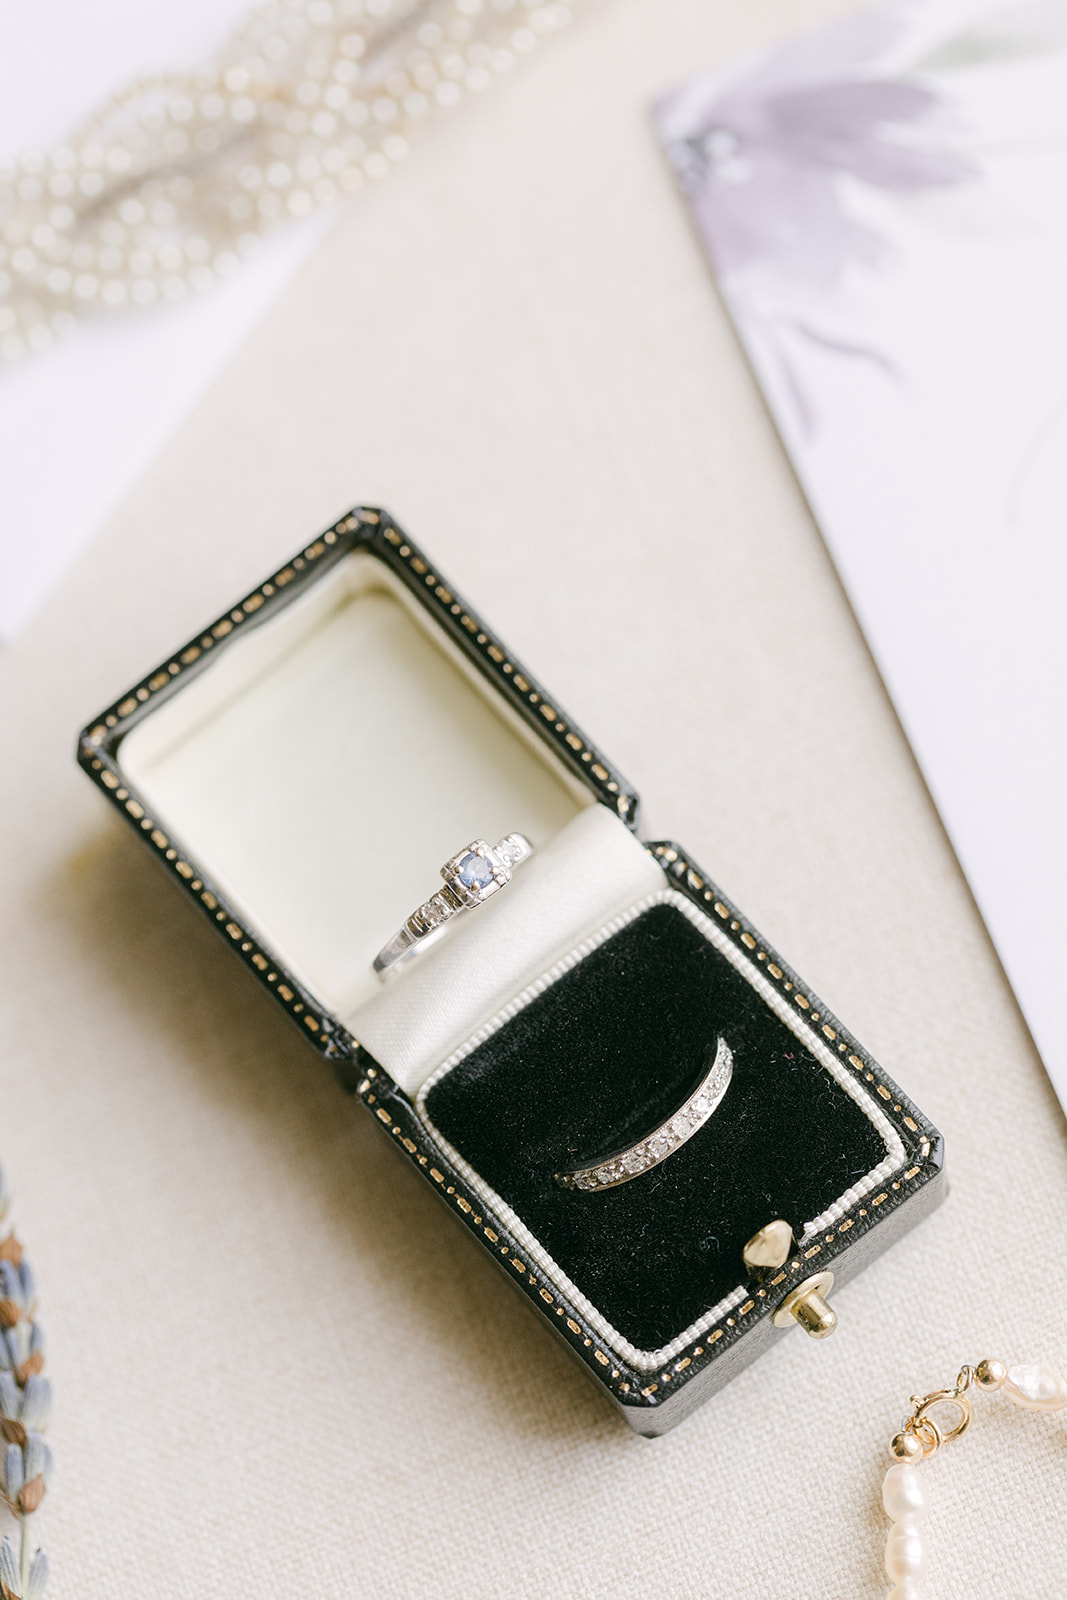 wedding day flat lay details at glen manor house